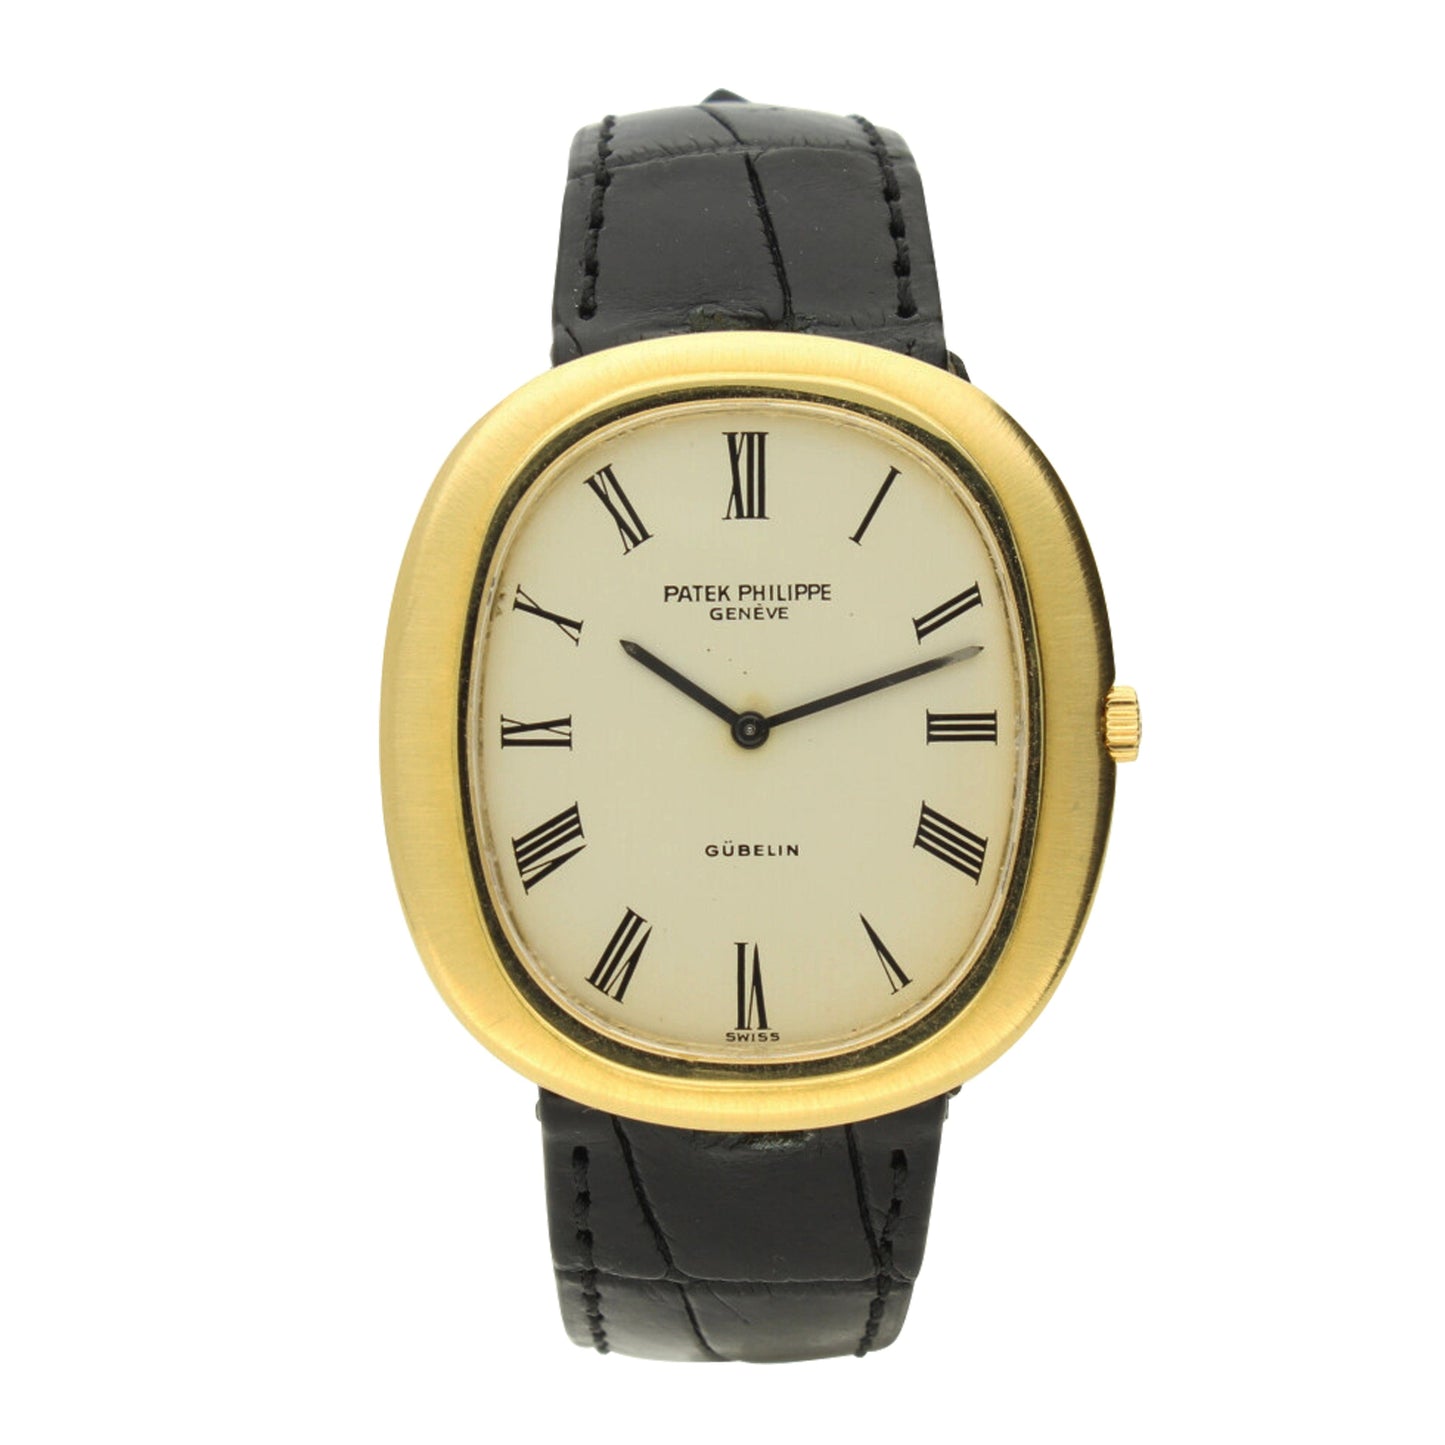 18ct yellow gold, reference 3589 "Golden Ellipse" automatic wristwatch, retailed by GÜBELIN. Made 1971